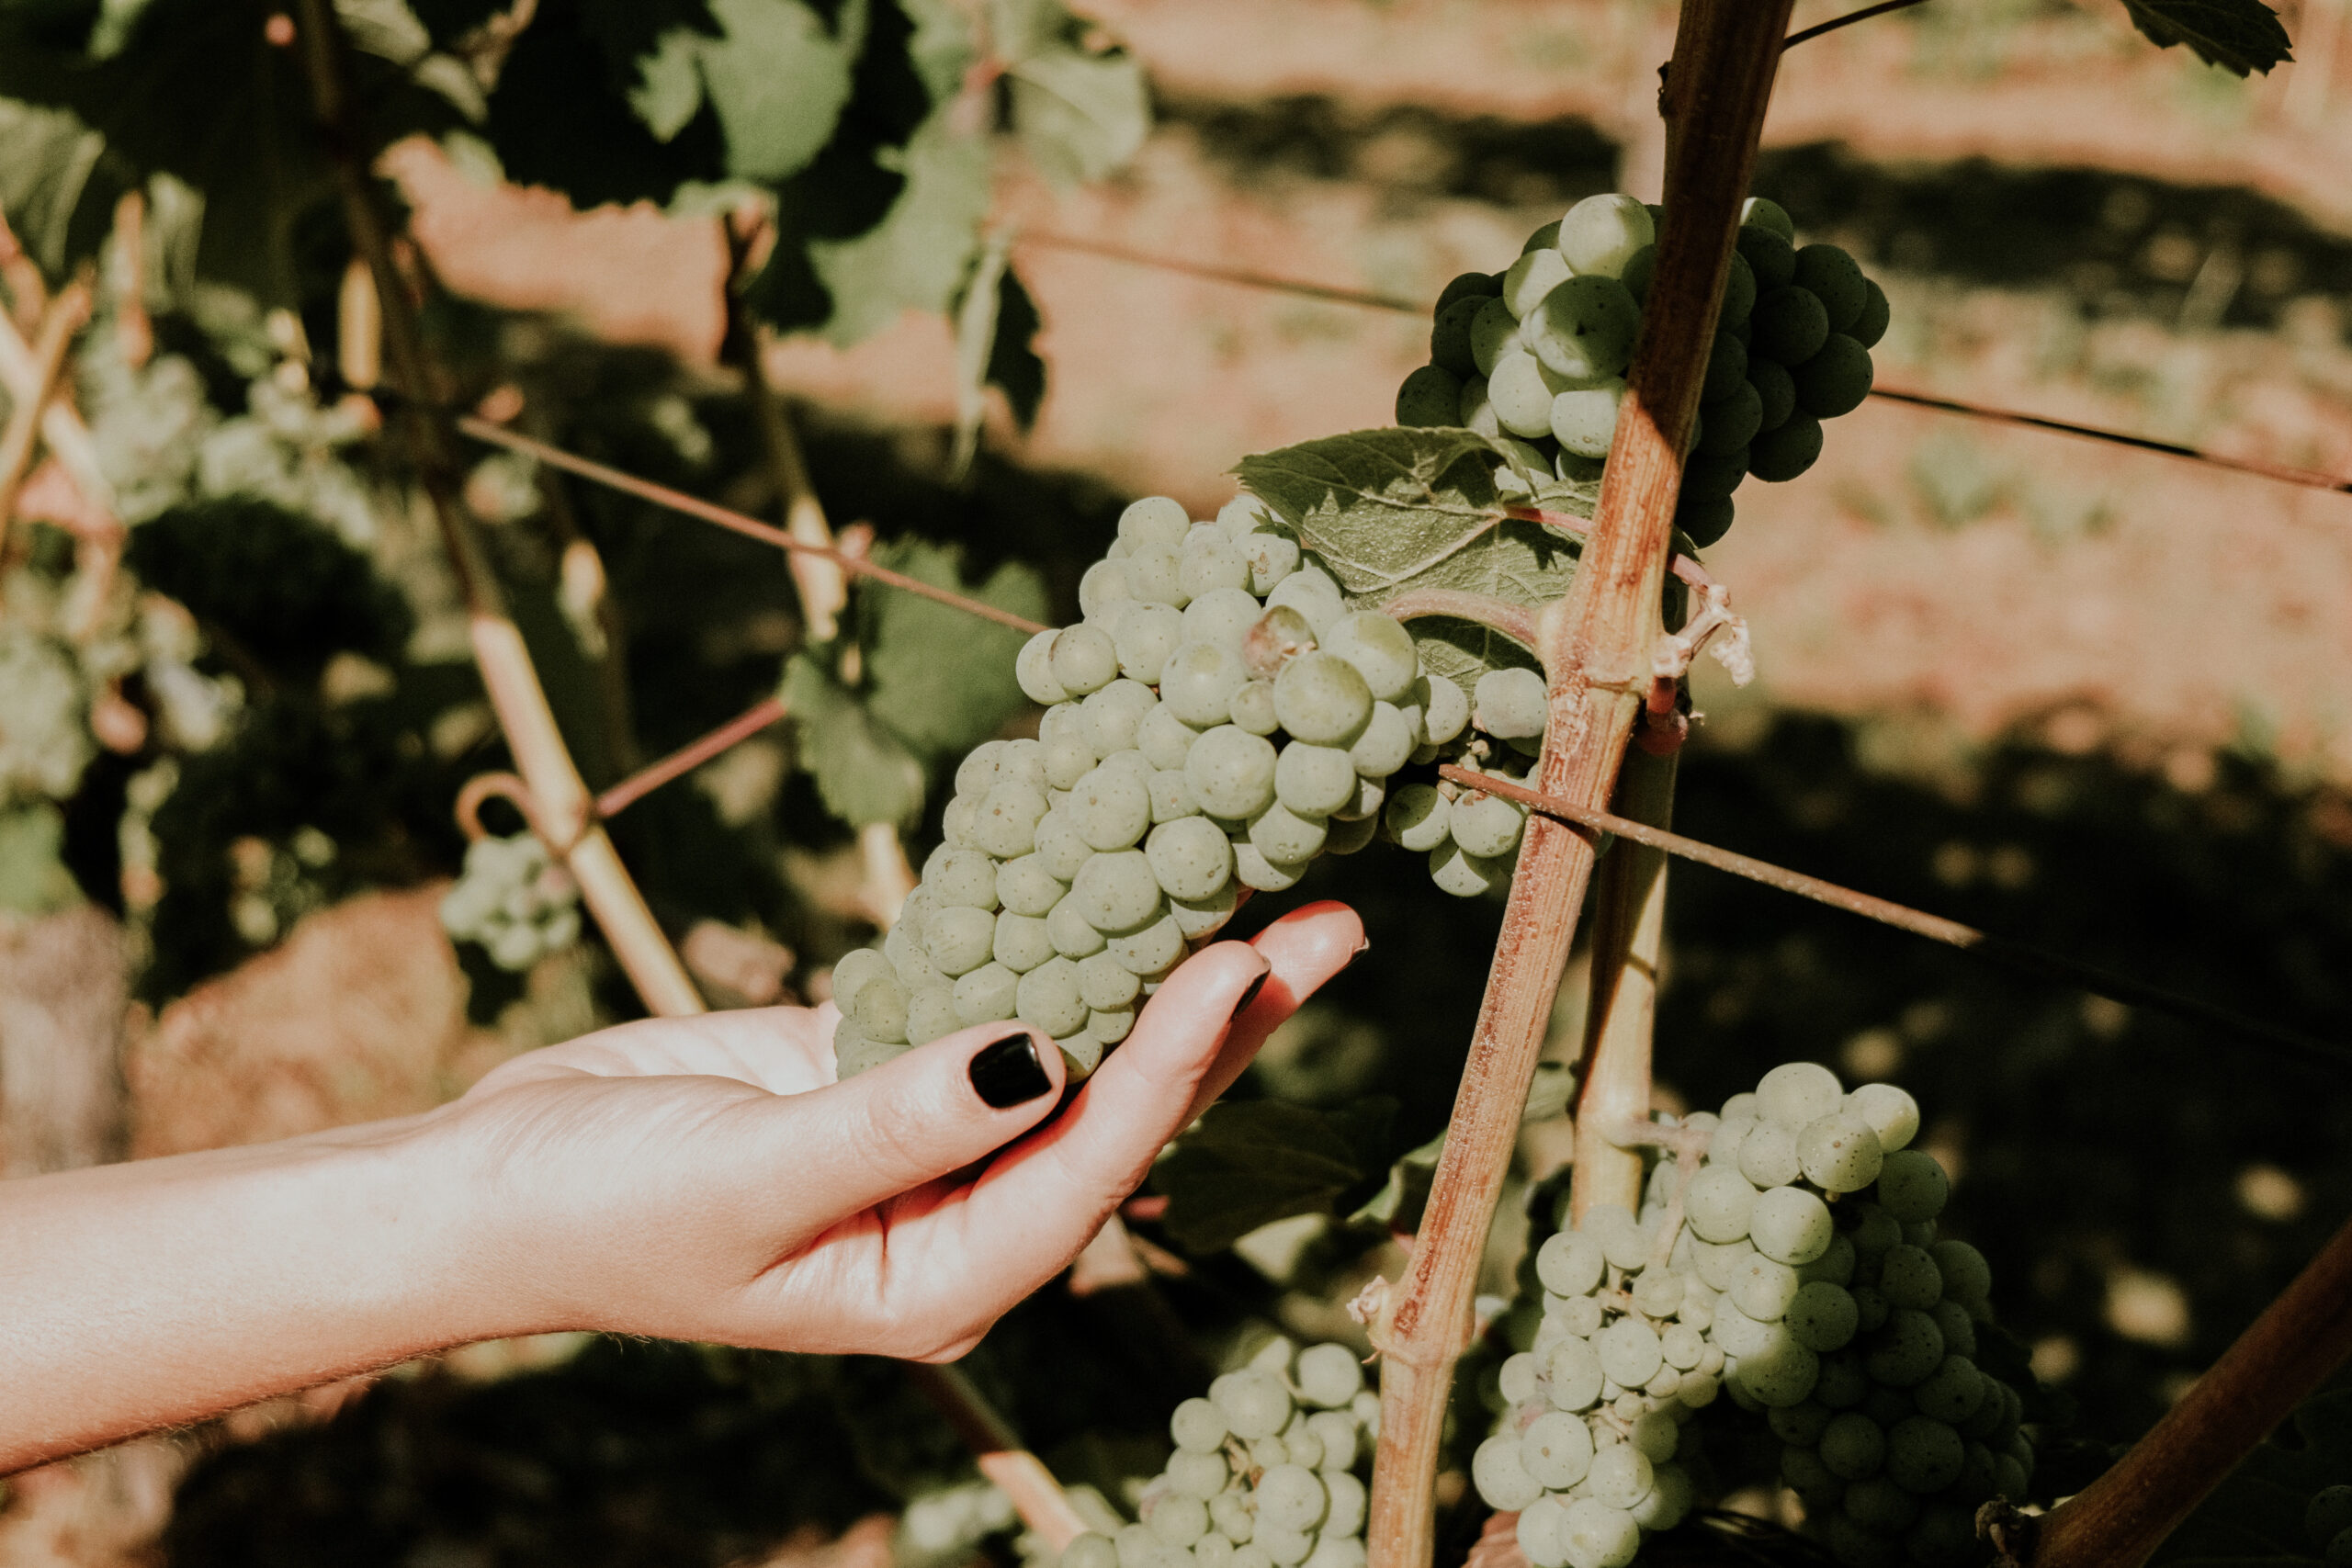 A hand gently holding a bunch of green grapes on a vine